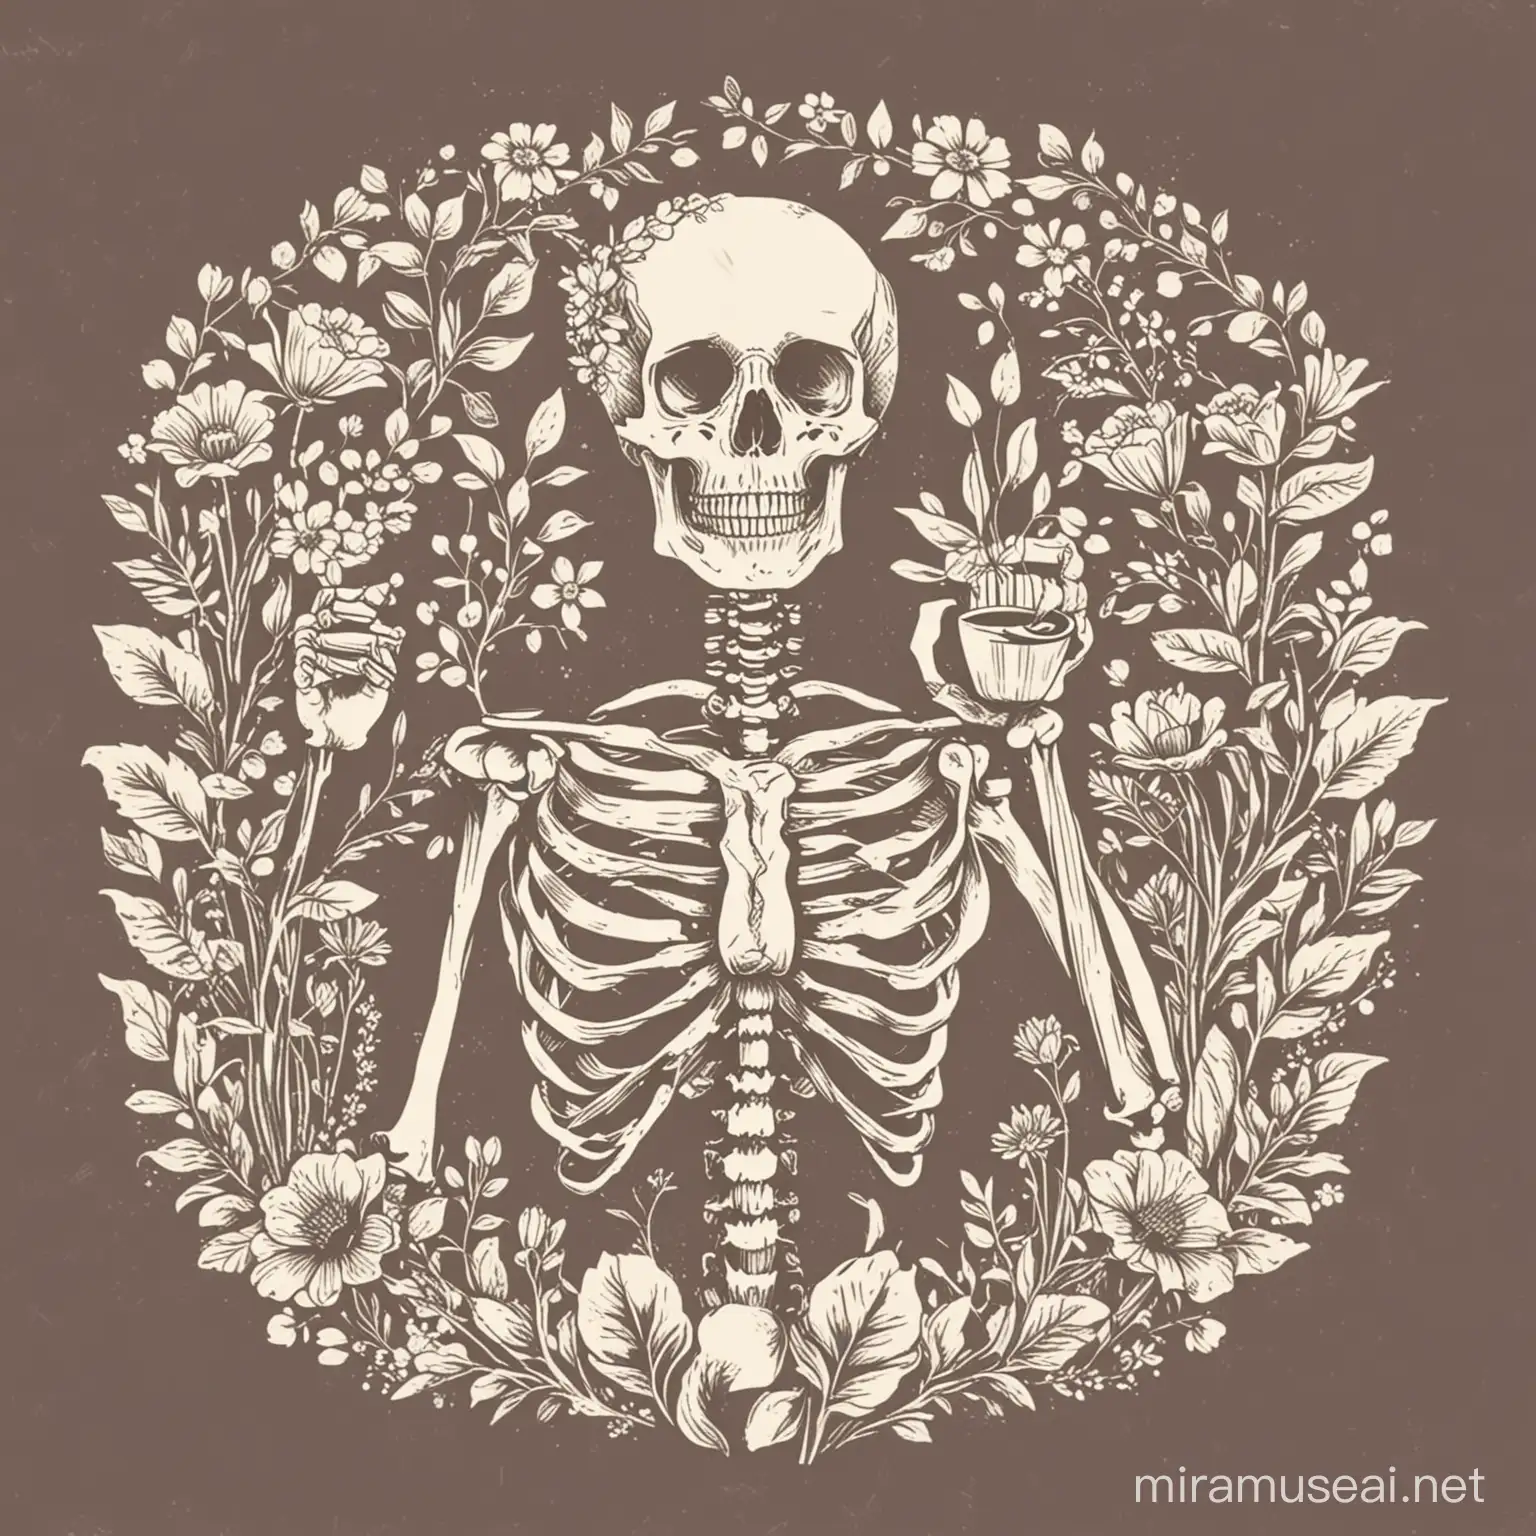 Vintage Style Human Skeleton Holding Coffee Cup Surrounded by Flowers